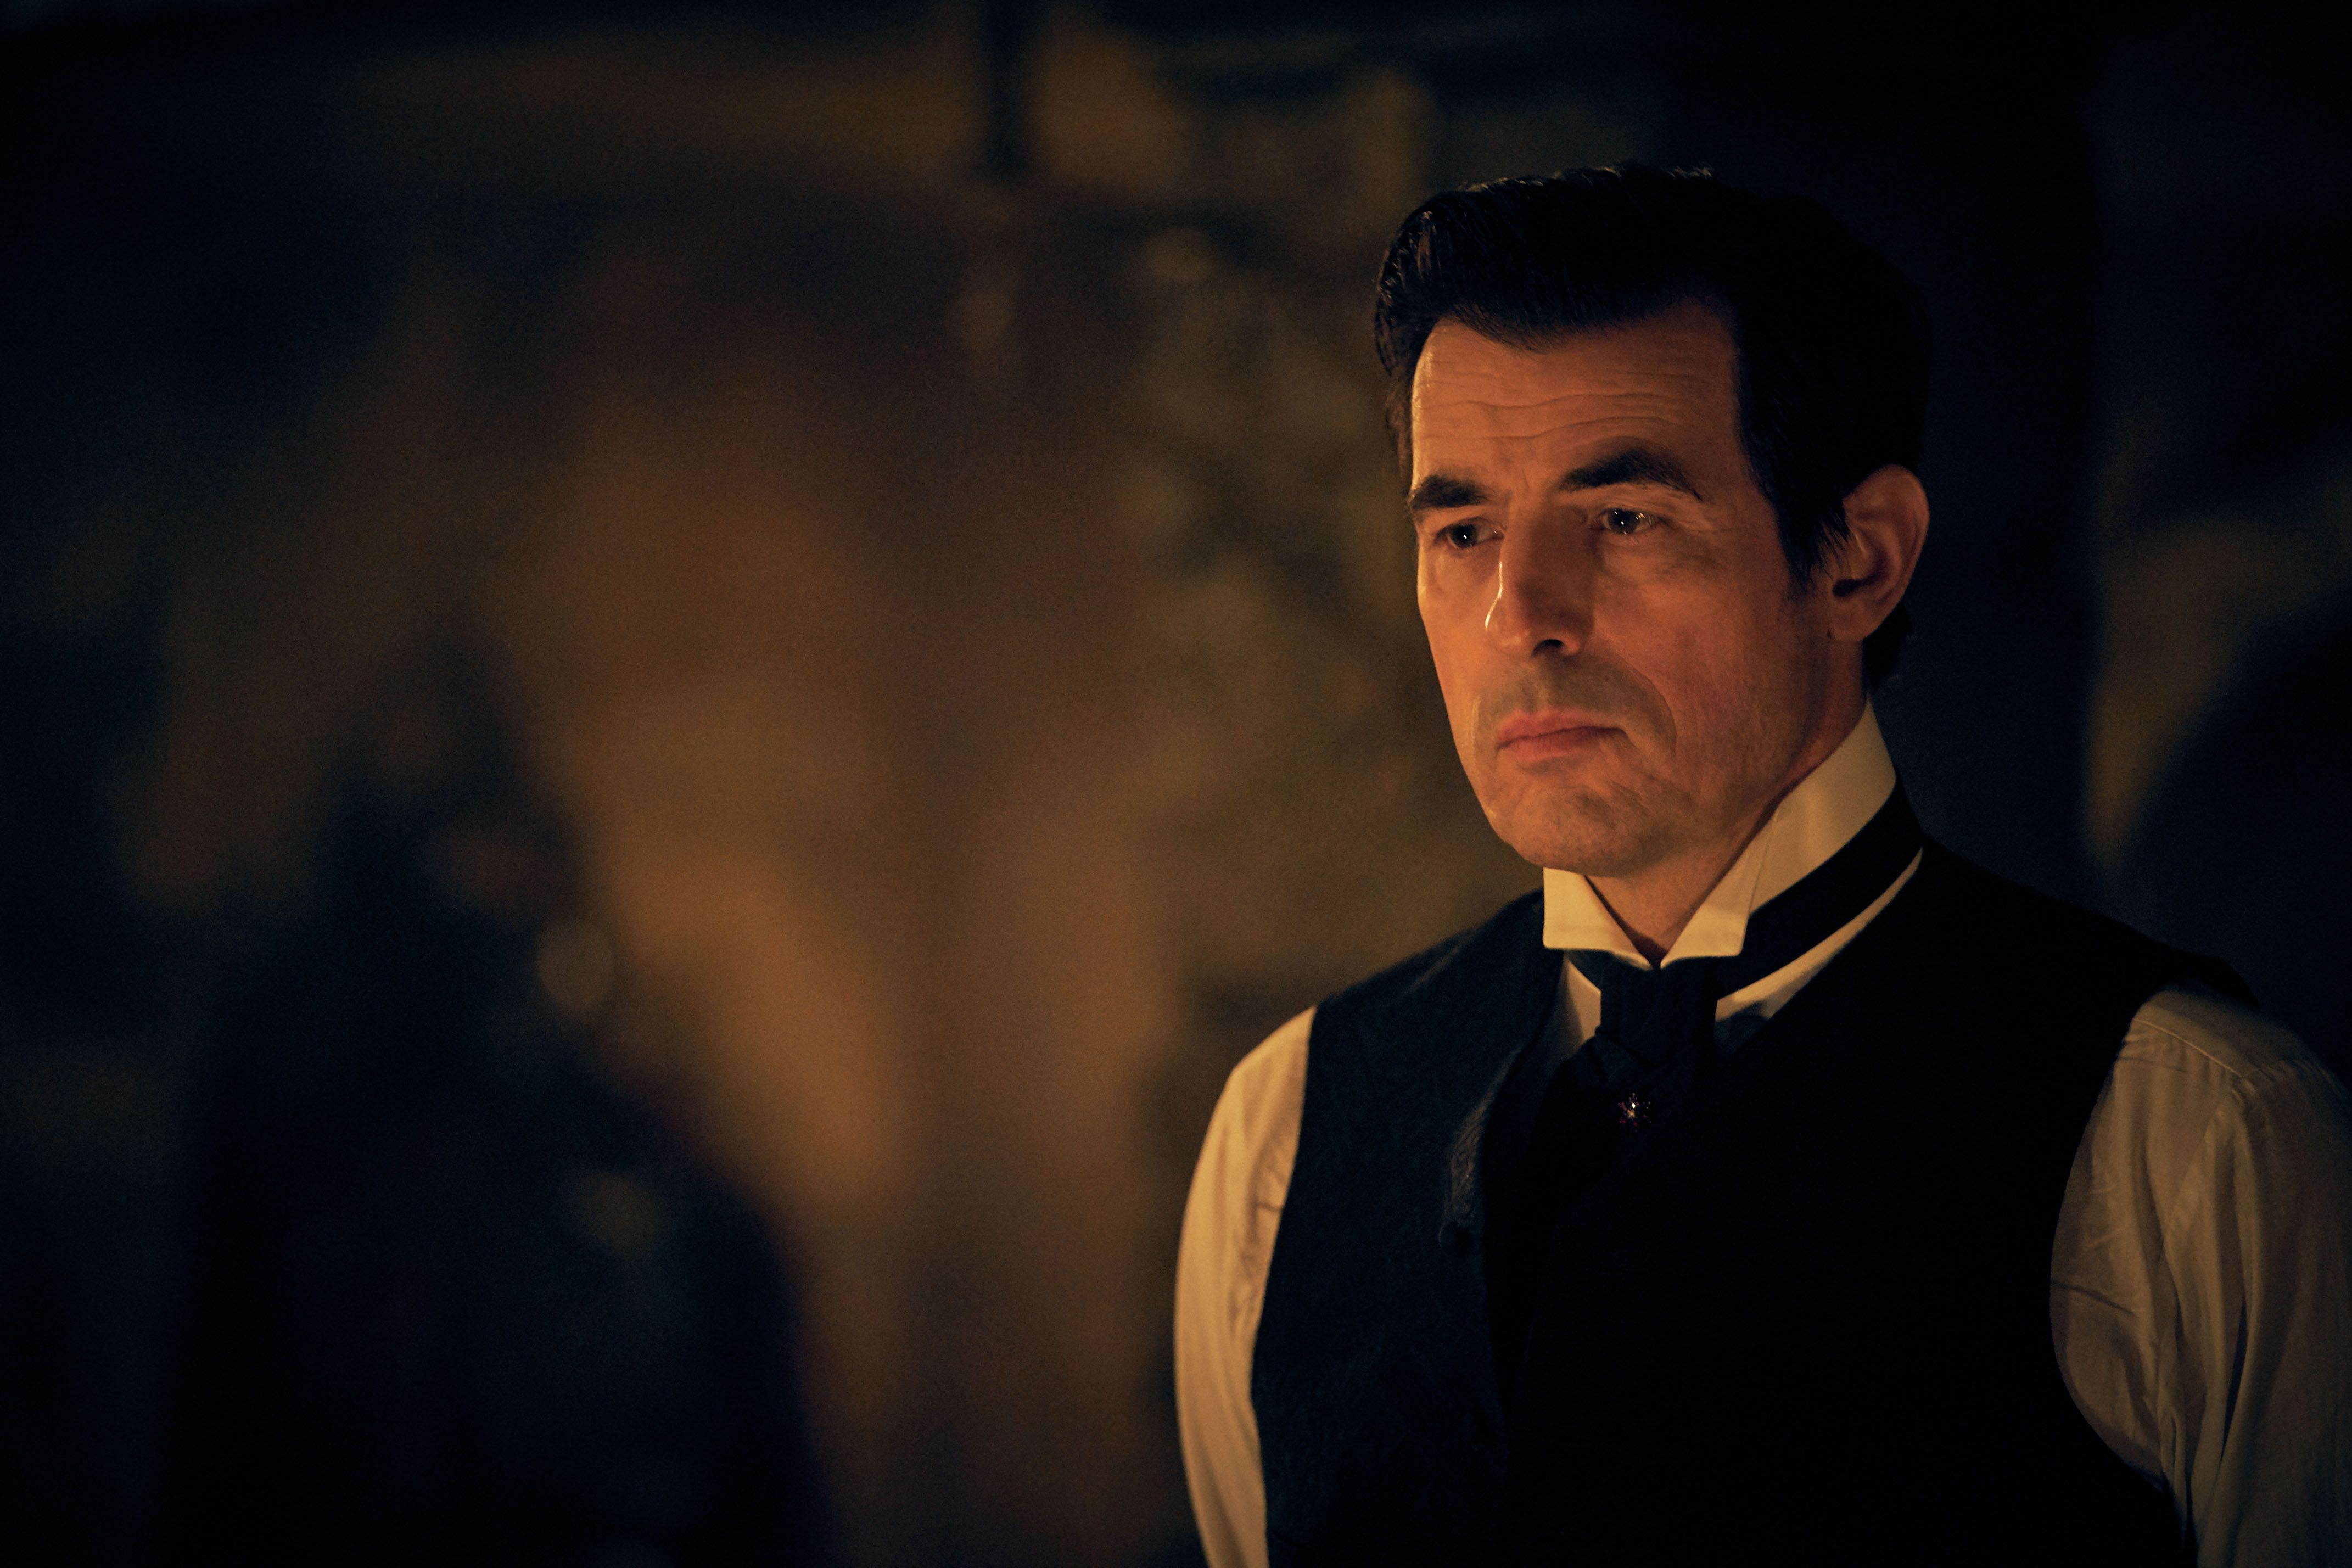 claes-bang-as-count-dracula-in-dracula-coming-soon-to-bbc-one-1572191144.jpg